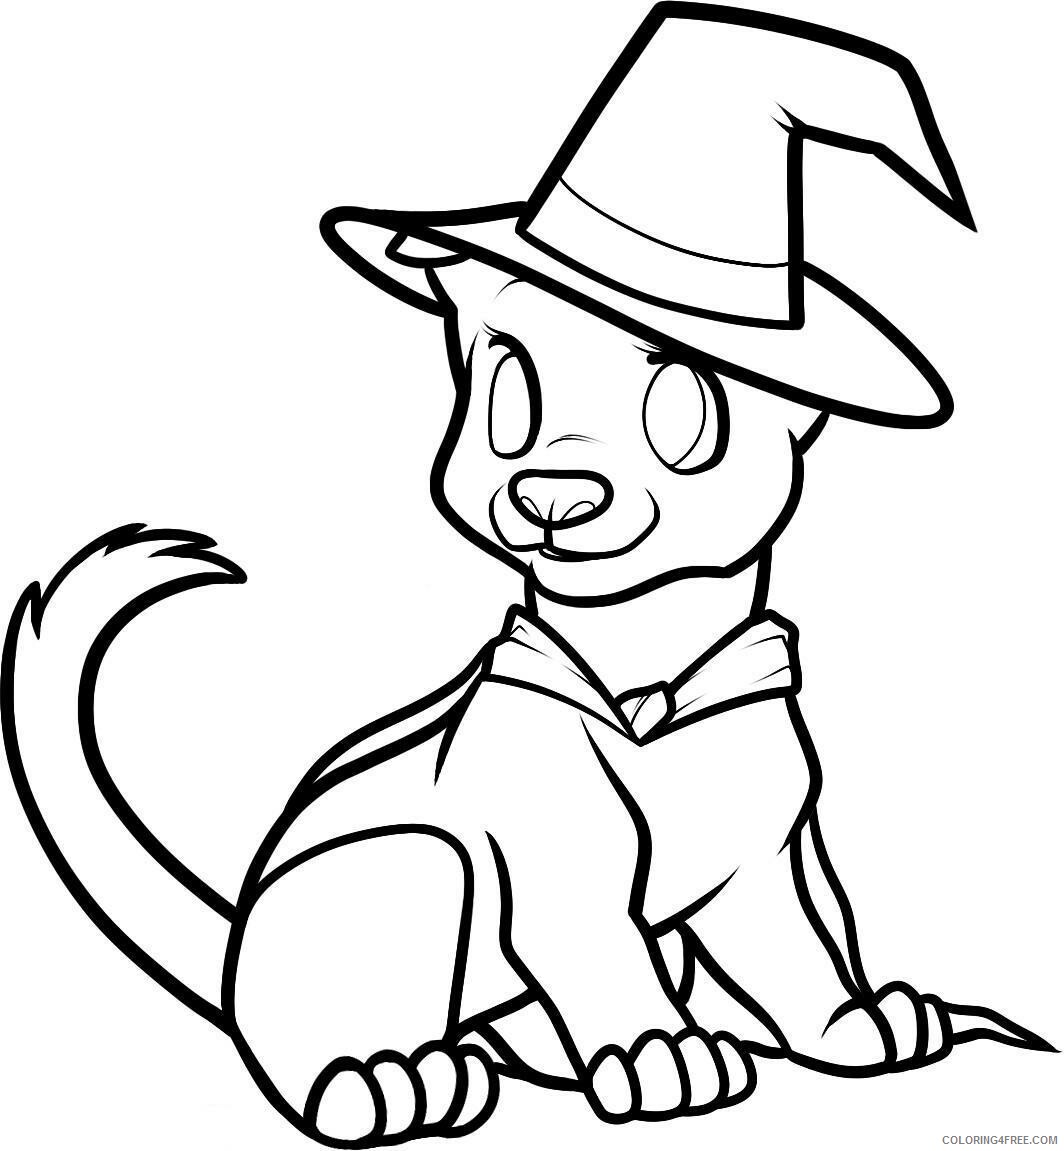 Puppy Coloring Pages Animal Printable Sheets Cute Puppy Halloween 2021 4074 Coloring4free